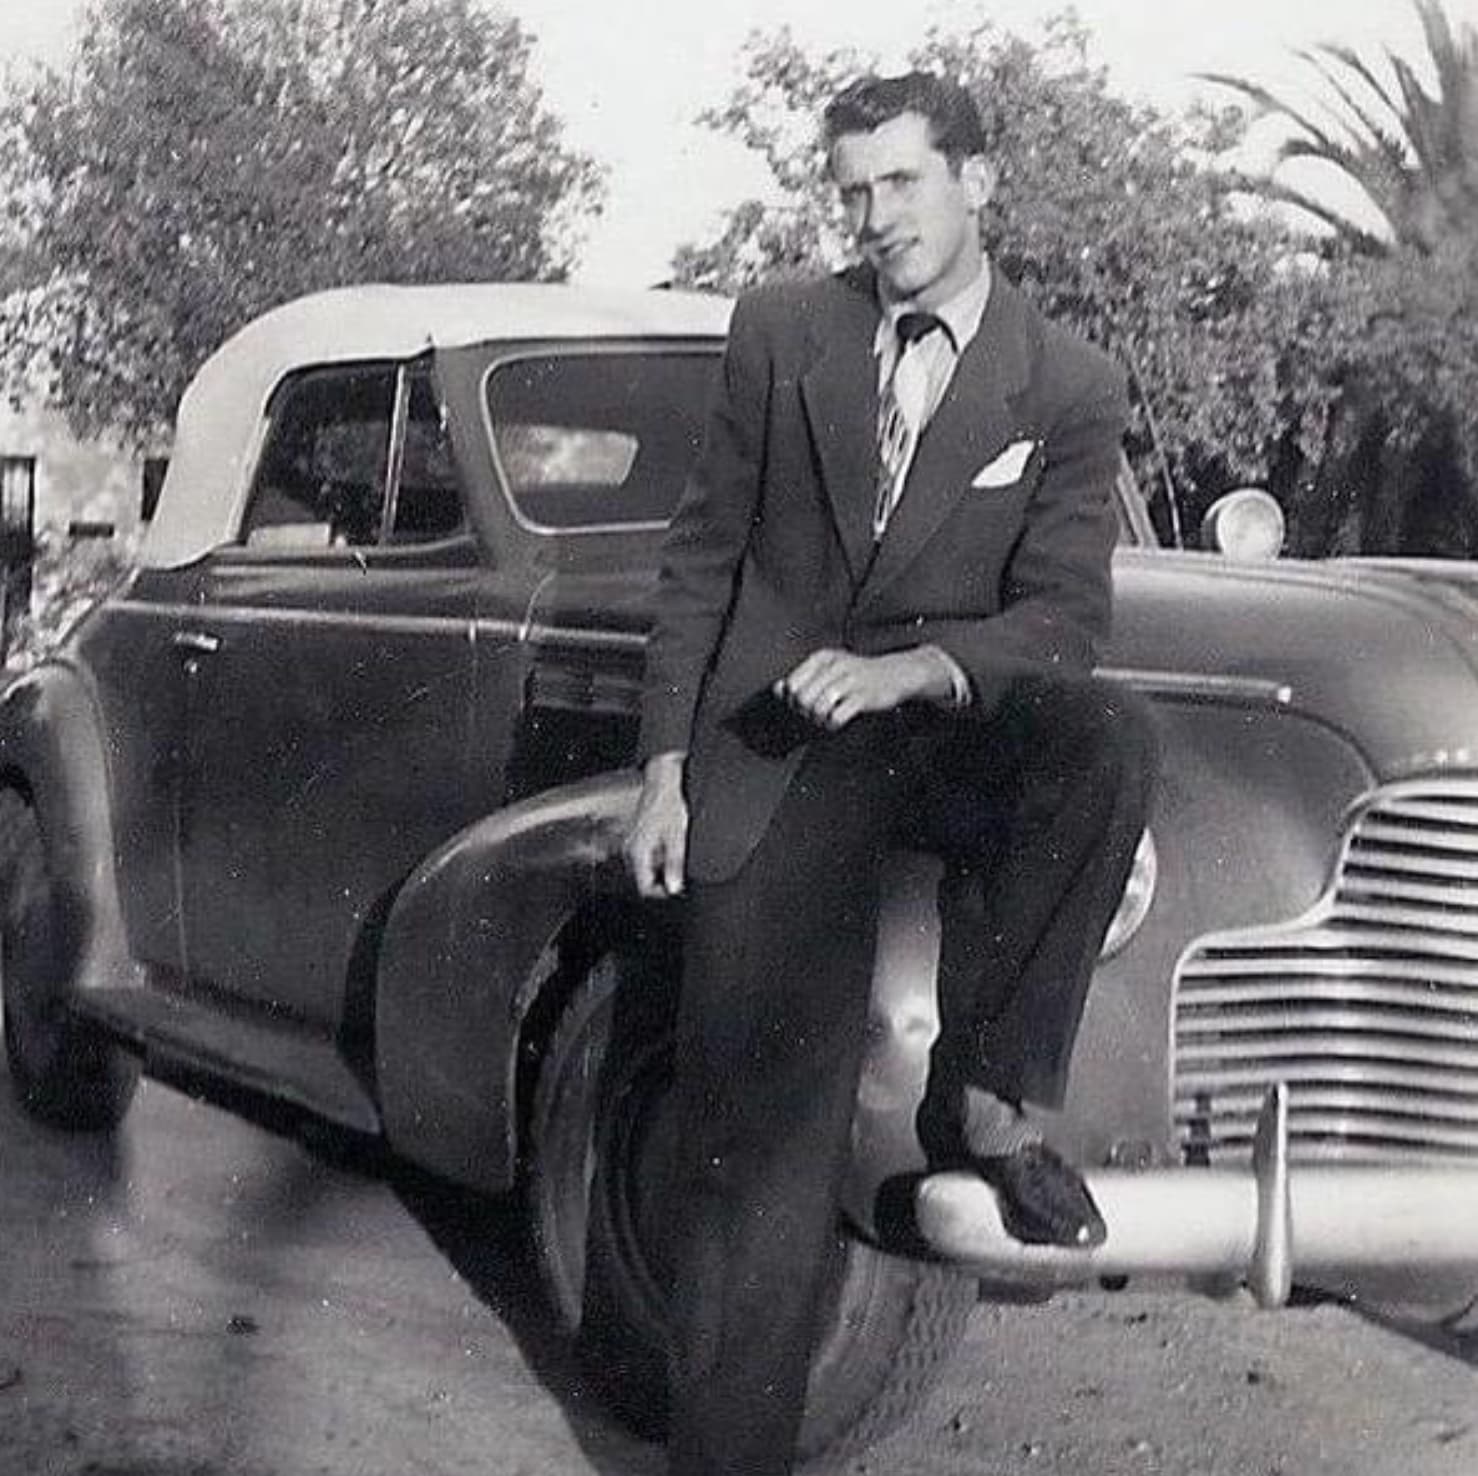 “My grandpa at age 16 next to his uncle’s car [Late 1940s].”